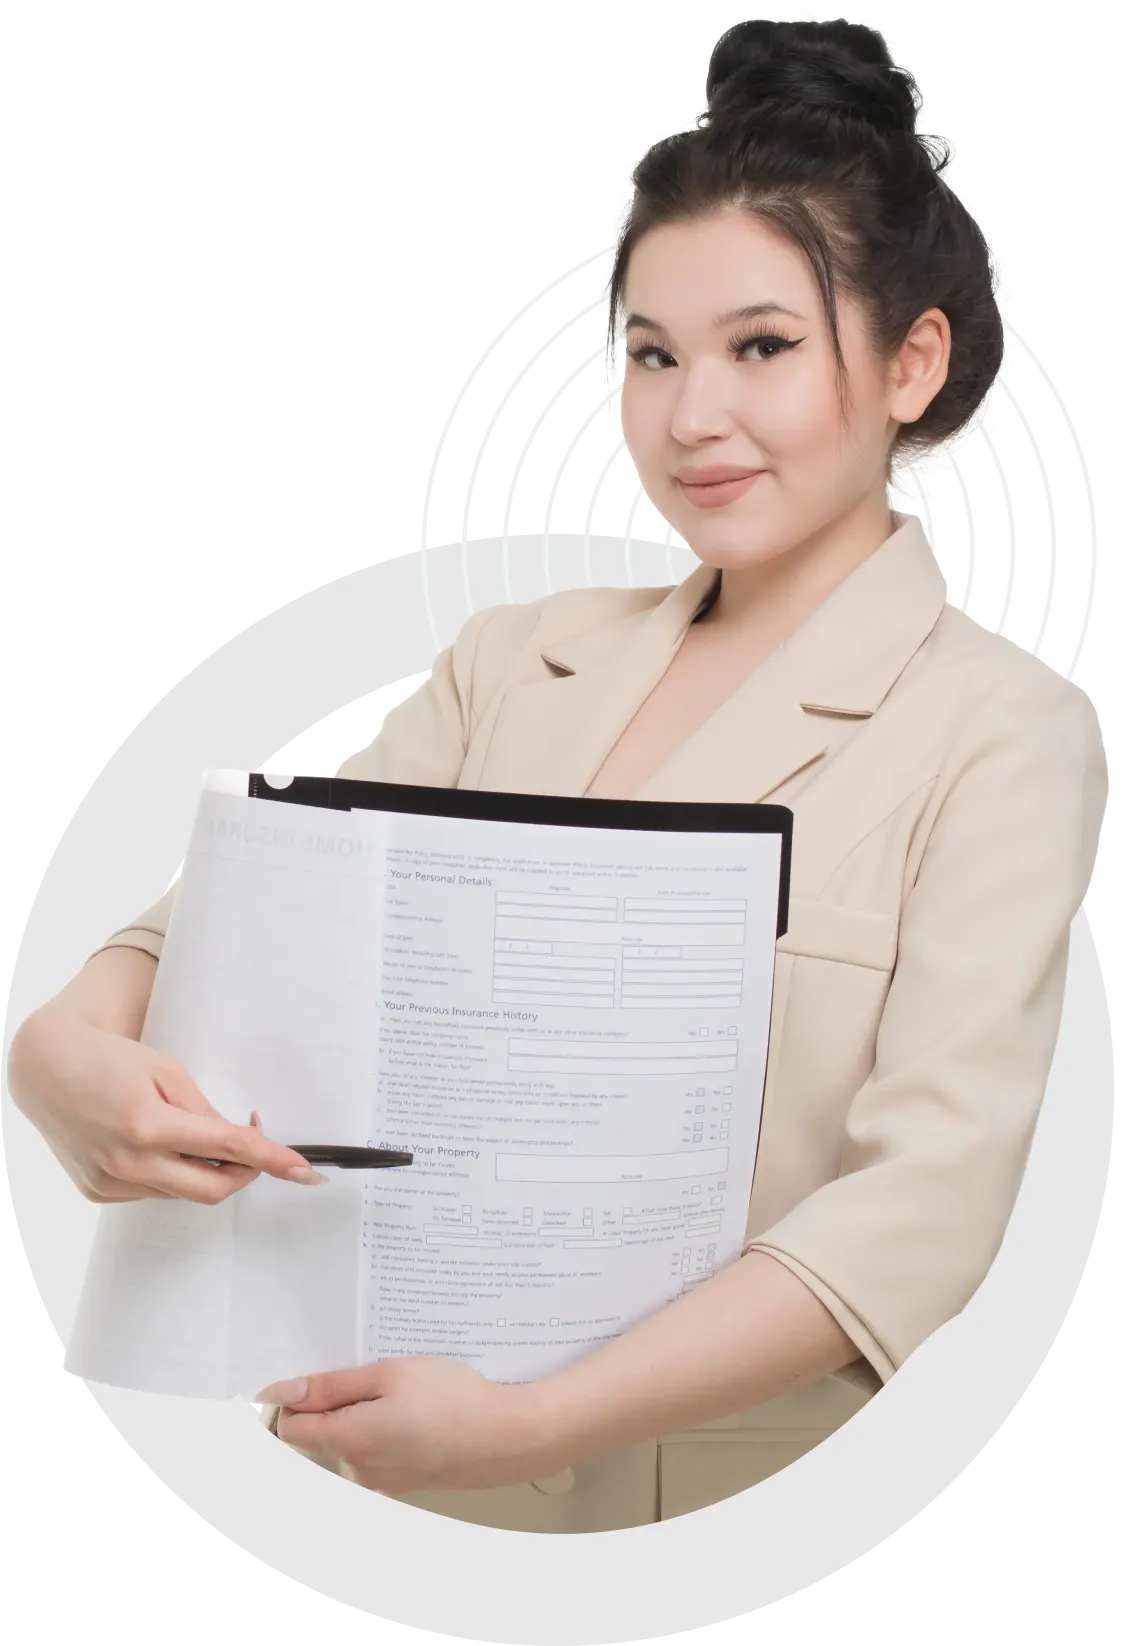 An image of a lady real estate agent holding a pen pointed to a section of a form.